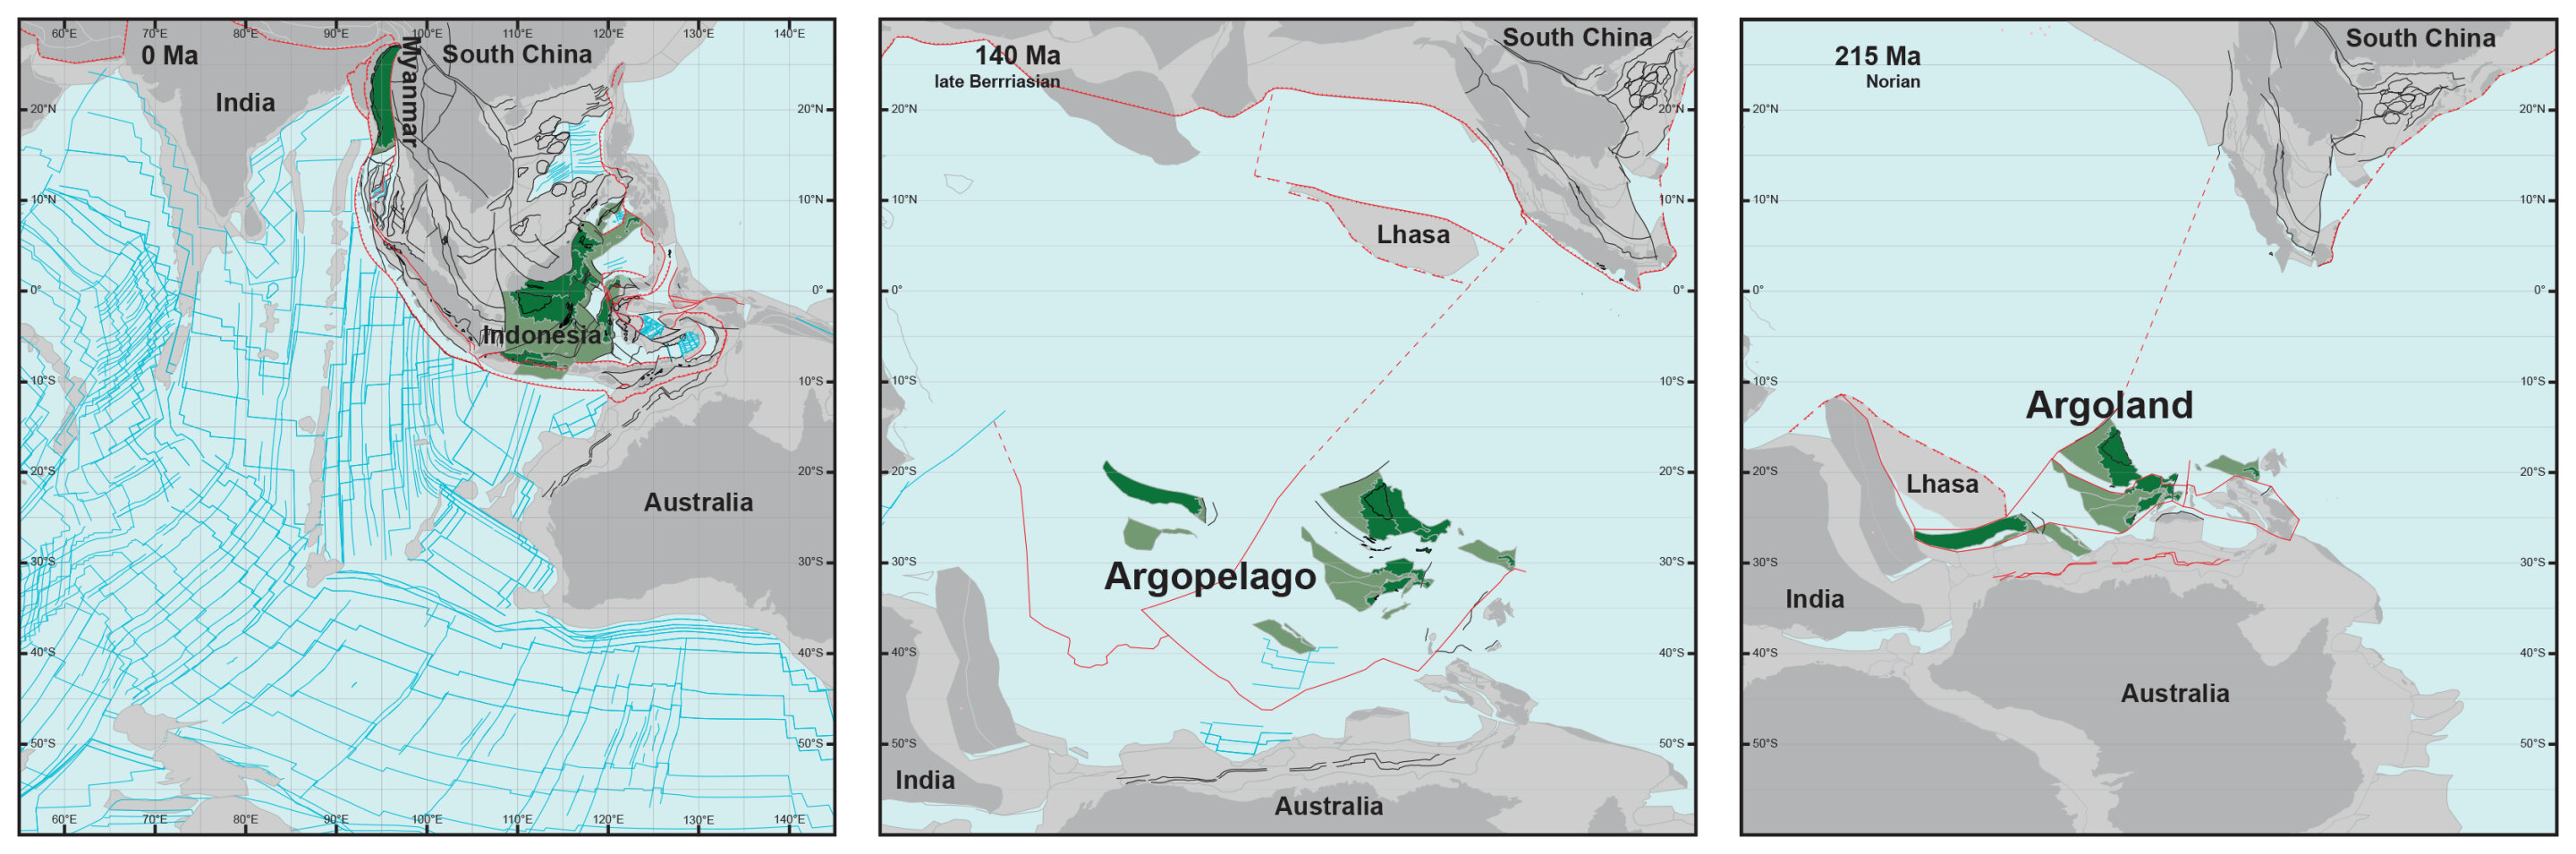 finding-argoland-how-a-lost-continent-resurfaced